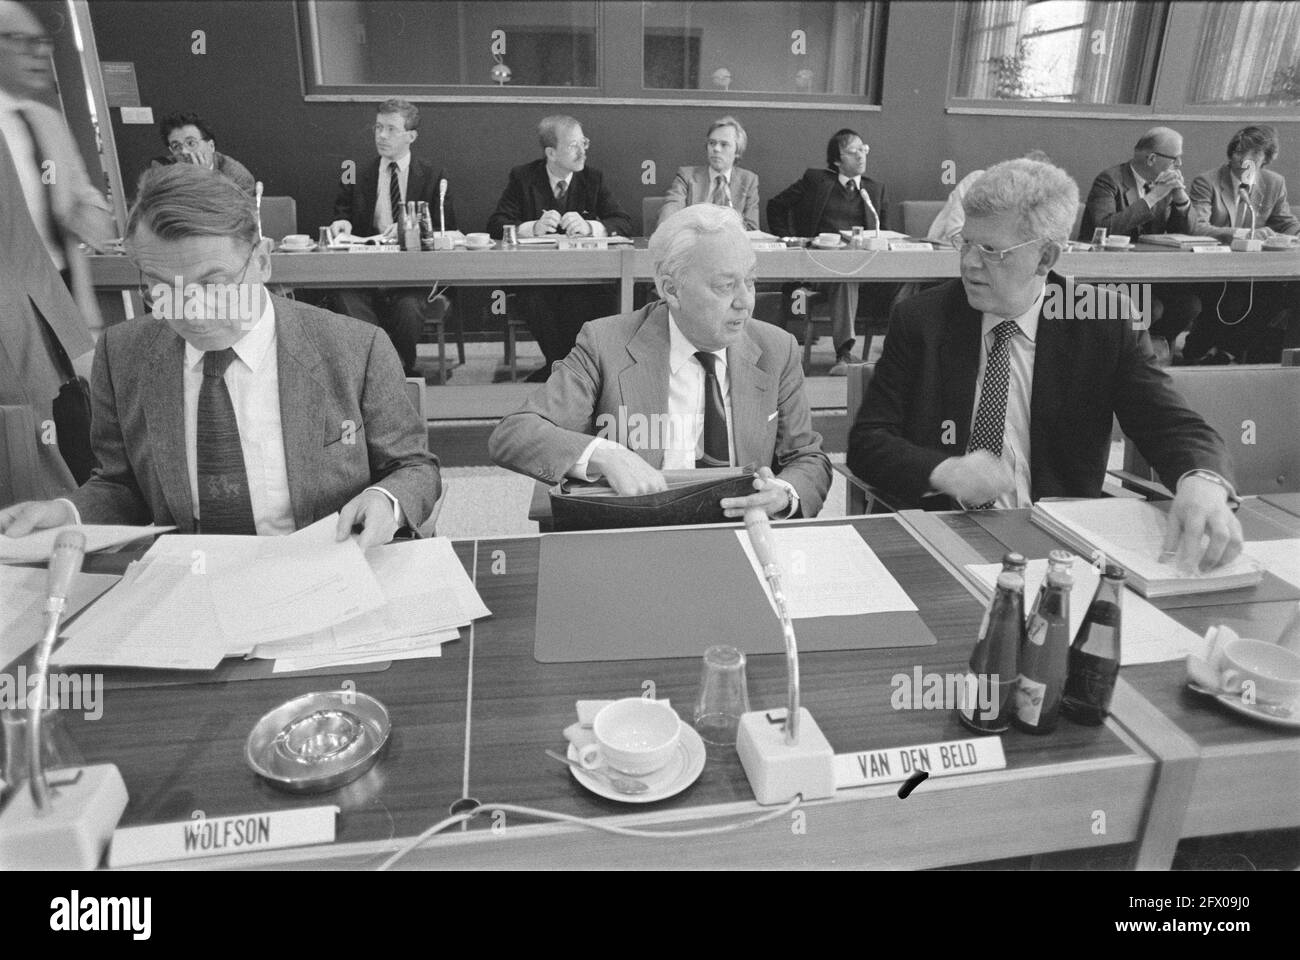 SER meeting; from left to right Wolfson, Van de Beld and Duisenberg, April 27, 1984, The Netherlands, 20th century press agency photo, news to remember, documentary, historic photography 1945-1990, visual stories, human history of the Twentieth Century, capturing moments in time Stock Photo